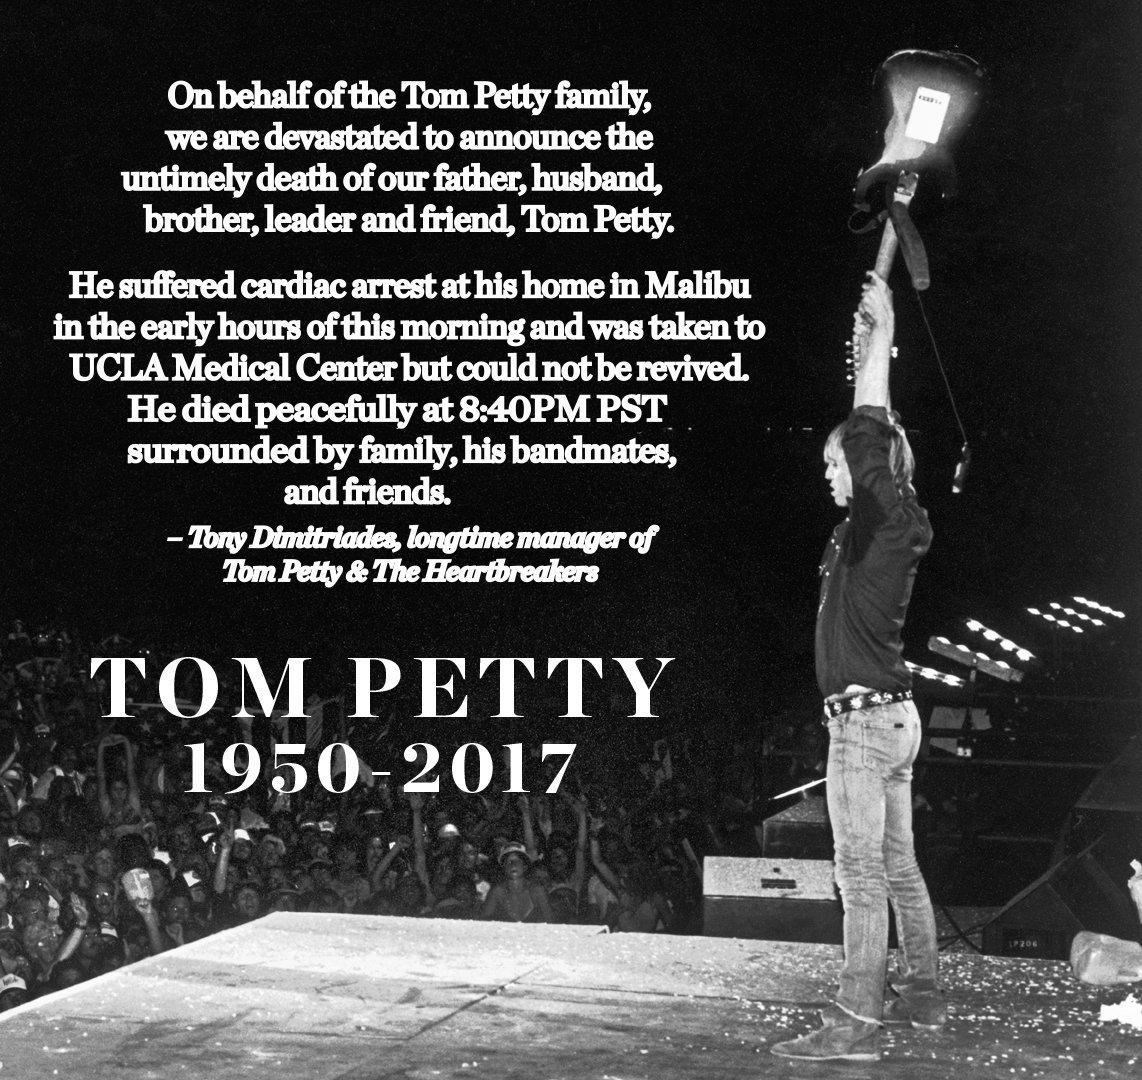 Tom Petty's Twitter account announces his death